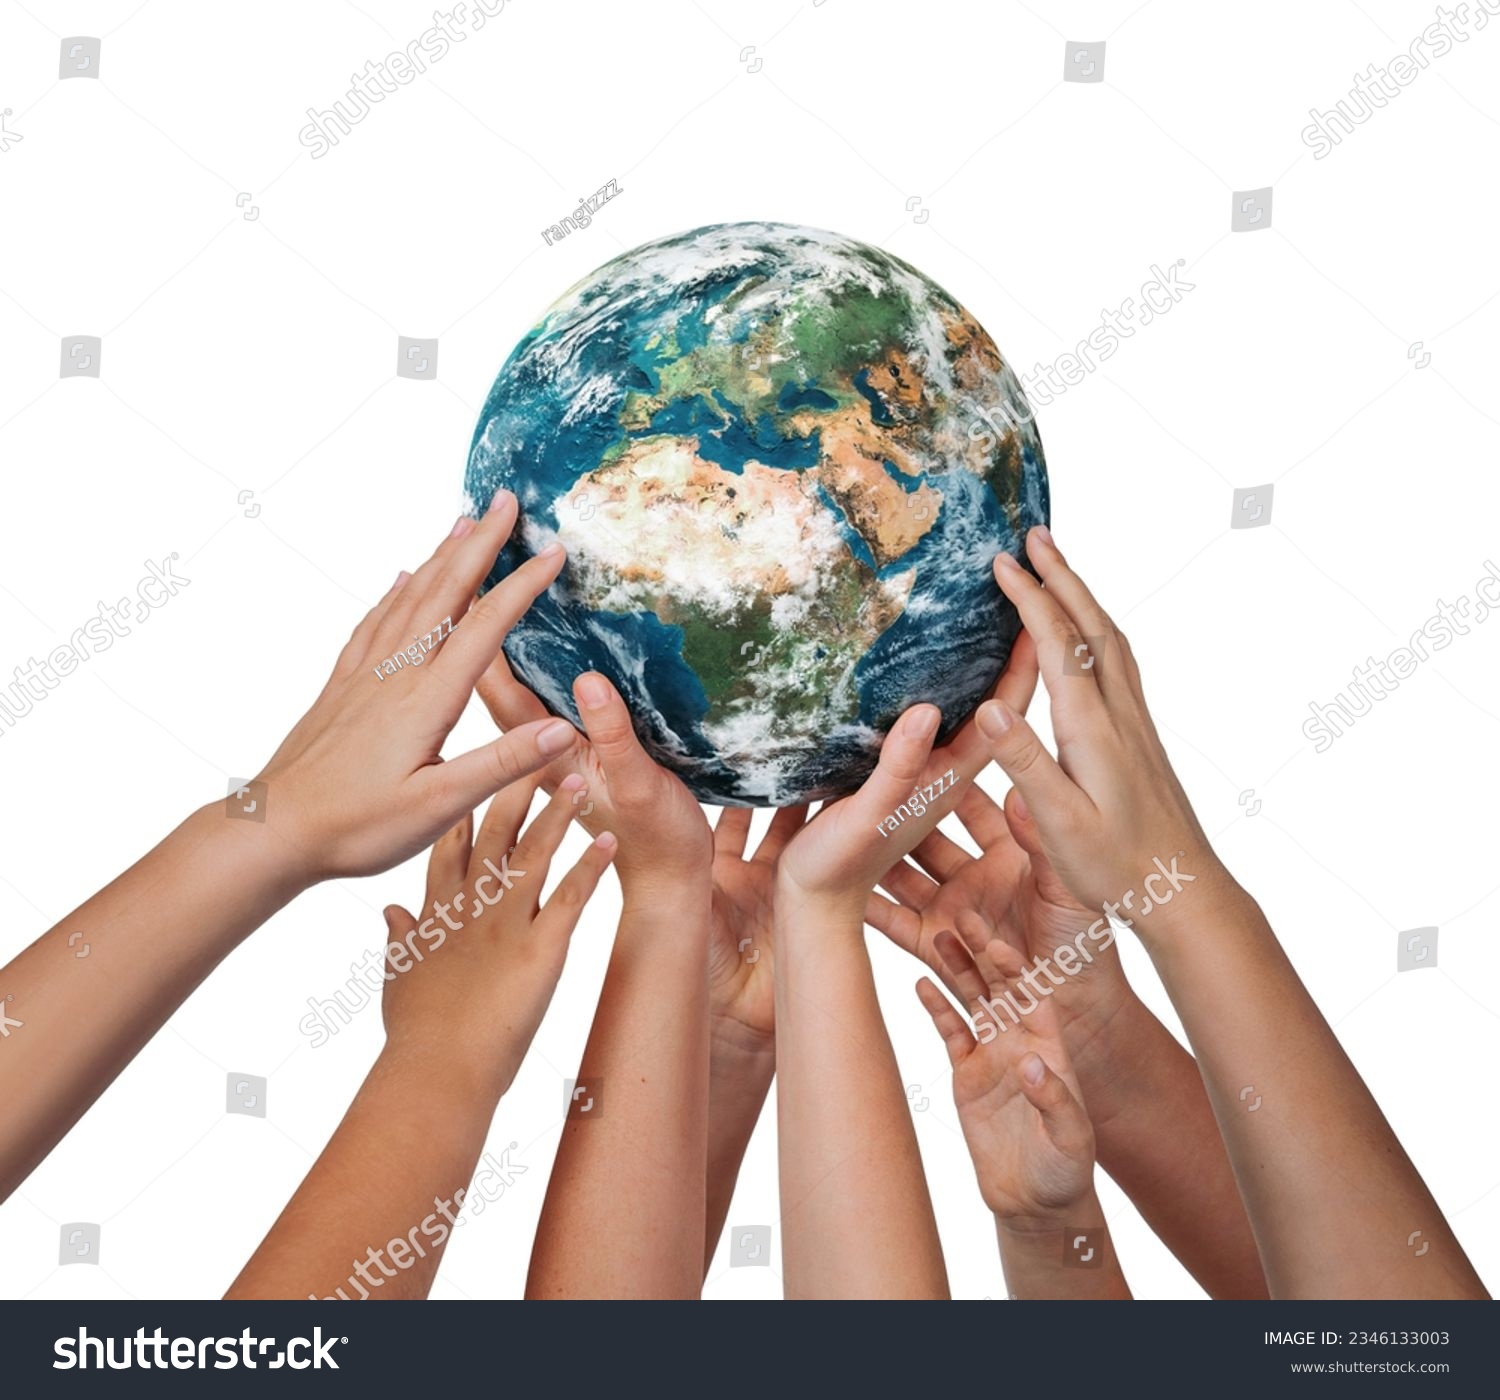 Many children hands holding planet earth isolated on white background #2346133003